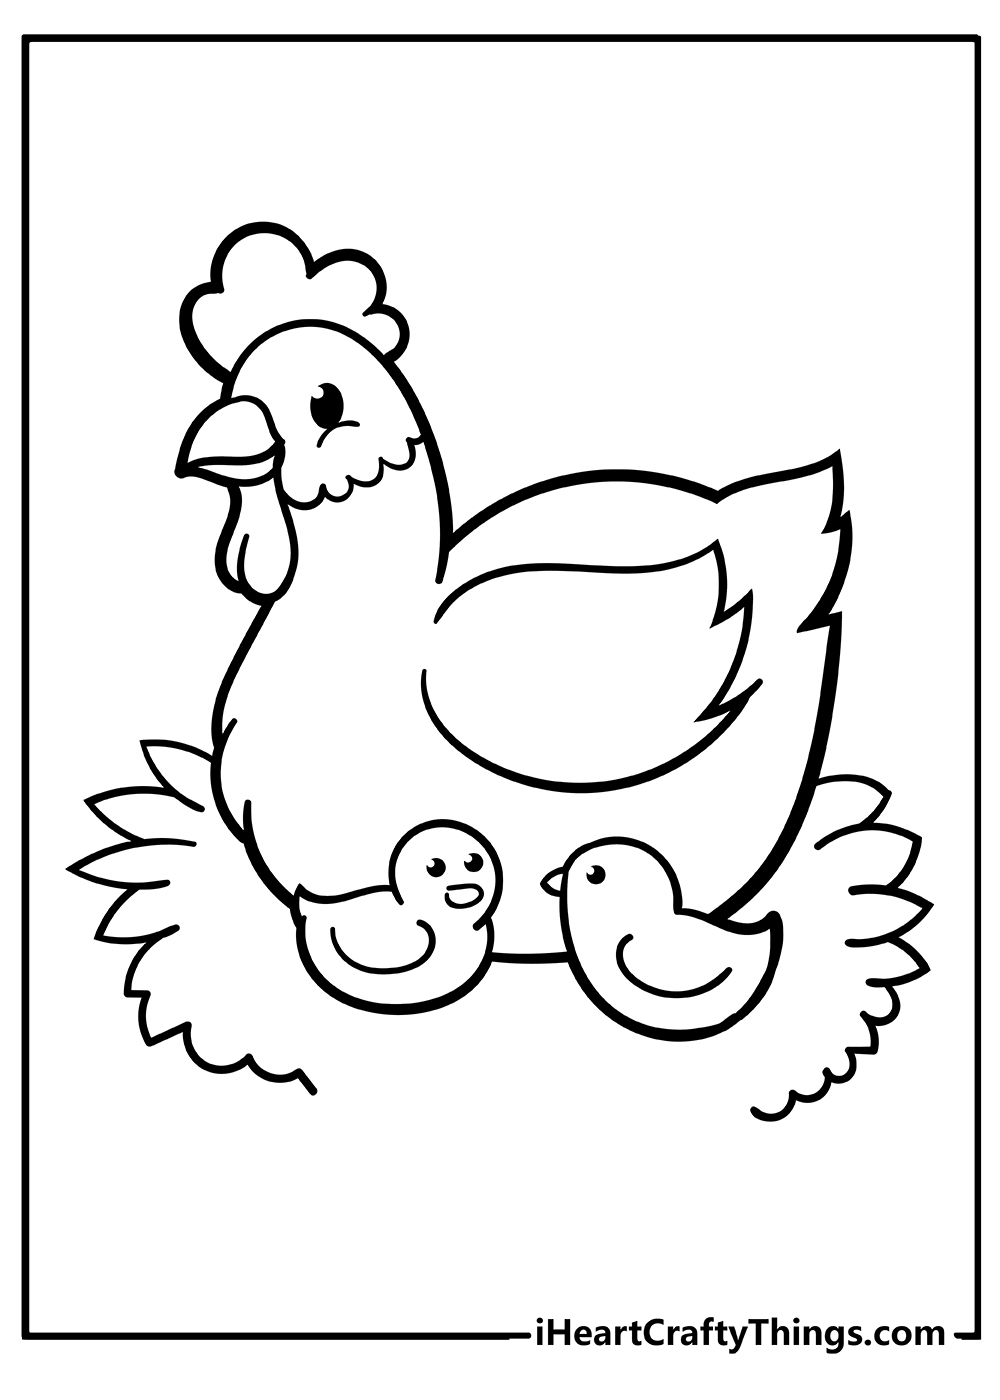 Printable Farm Animal Coloring Pages Updated 20